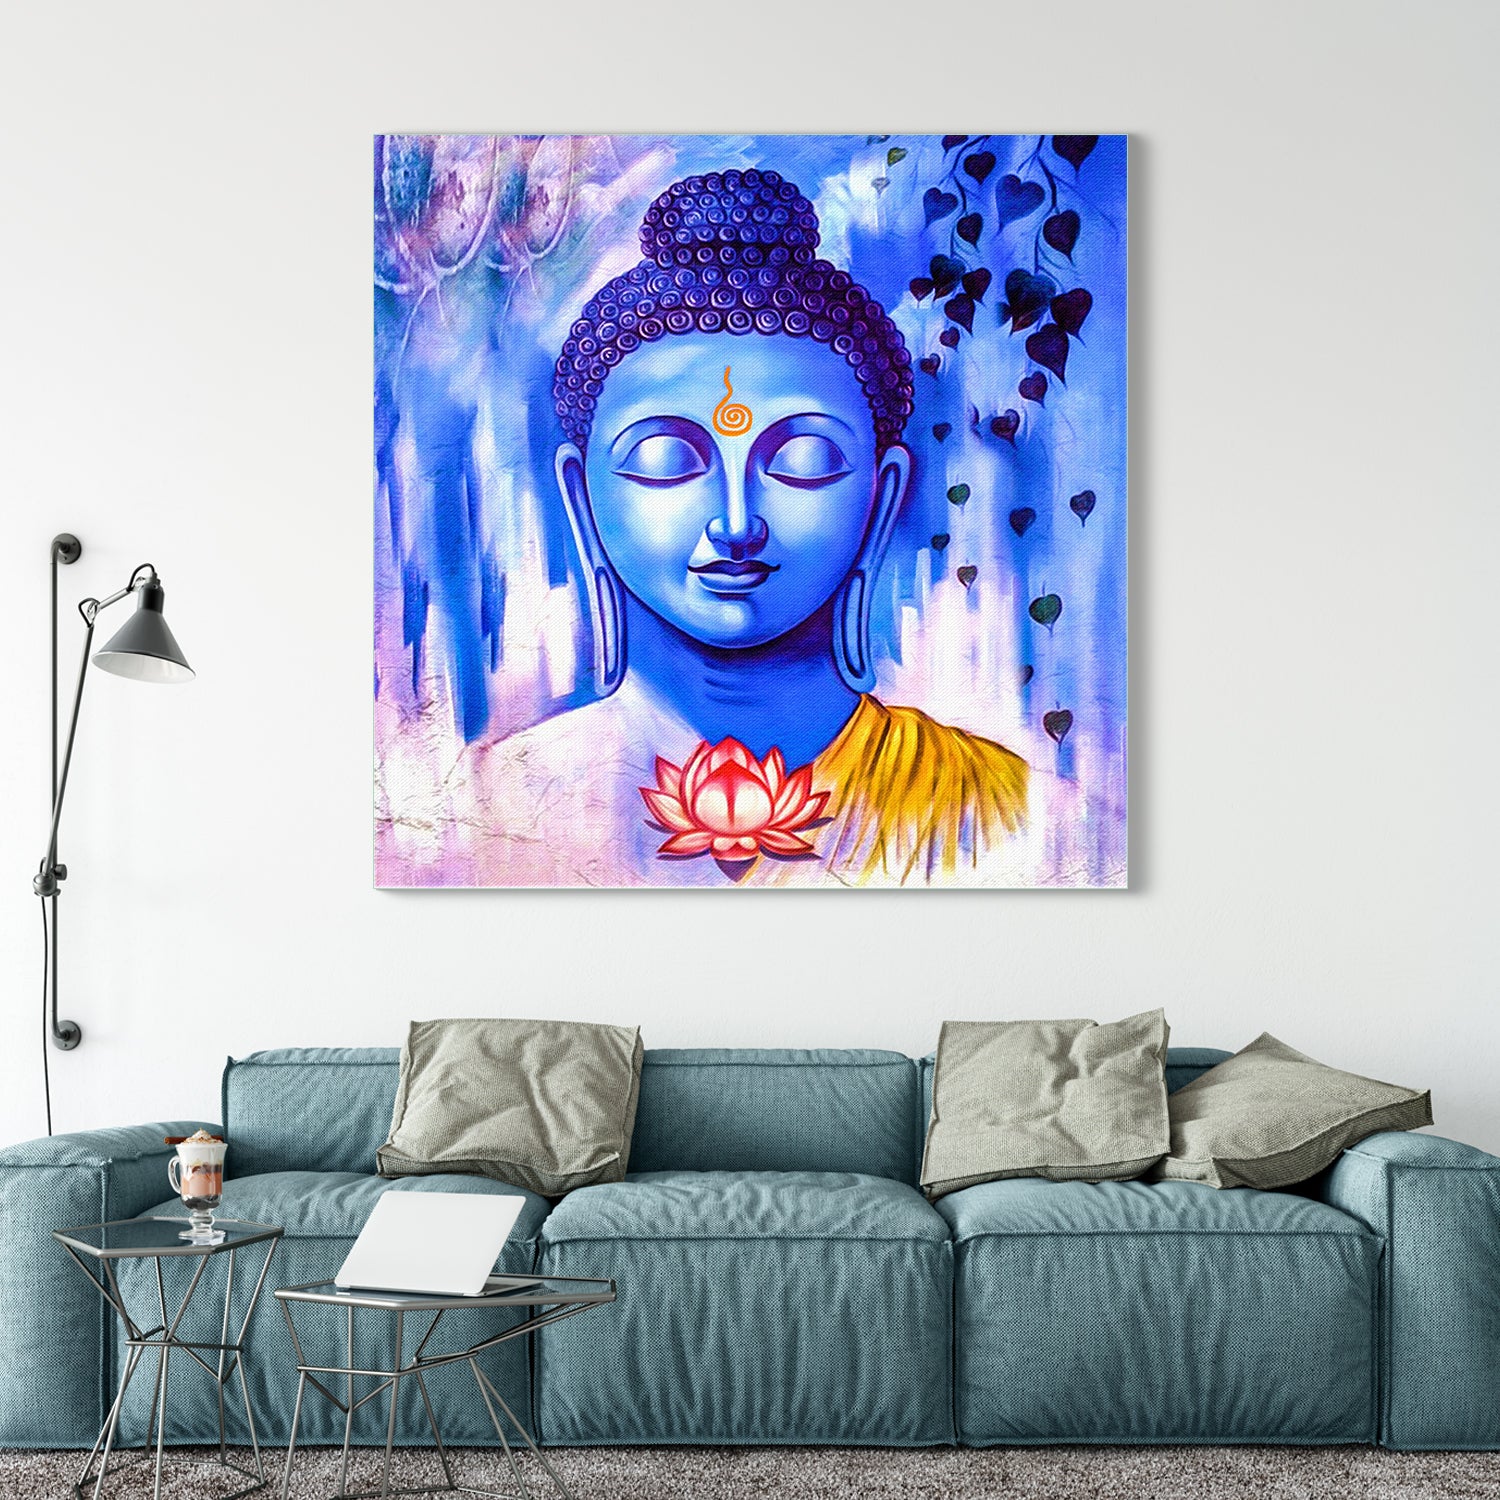 Black and White Wallpaper of Buddha for Home and Office